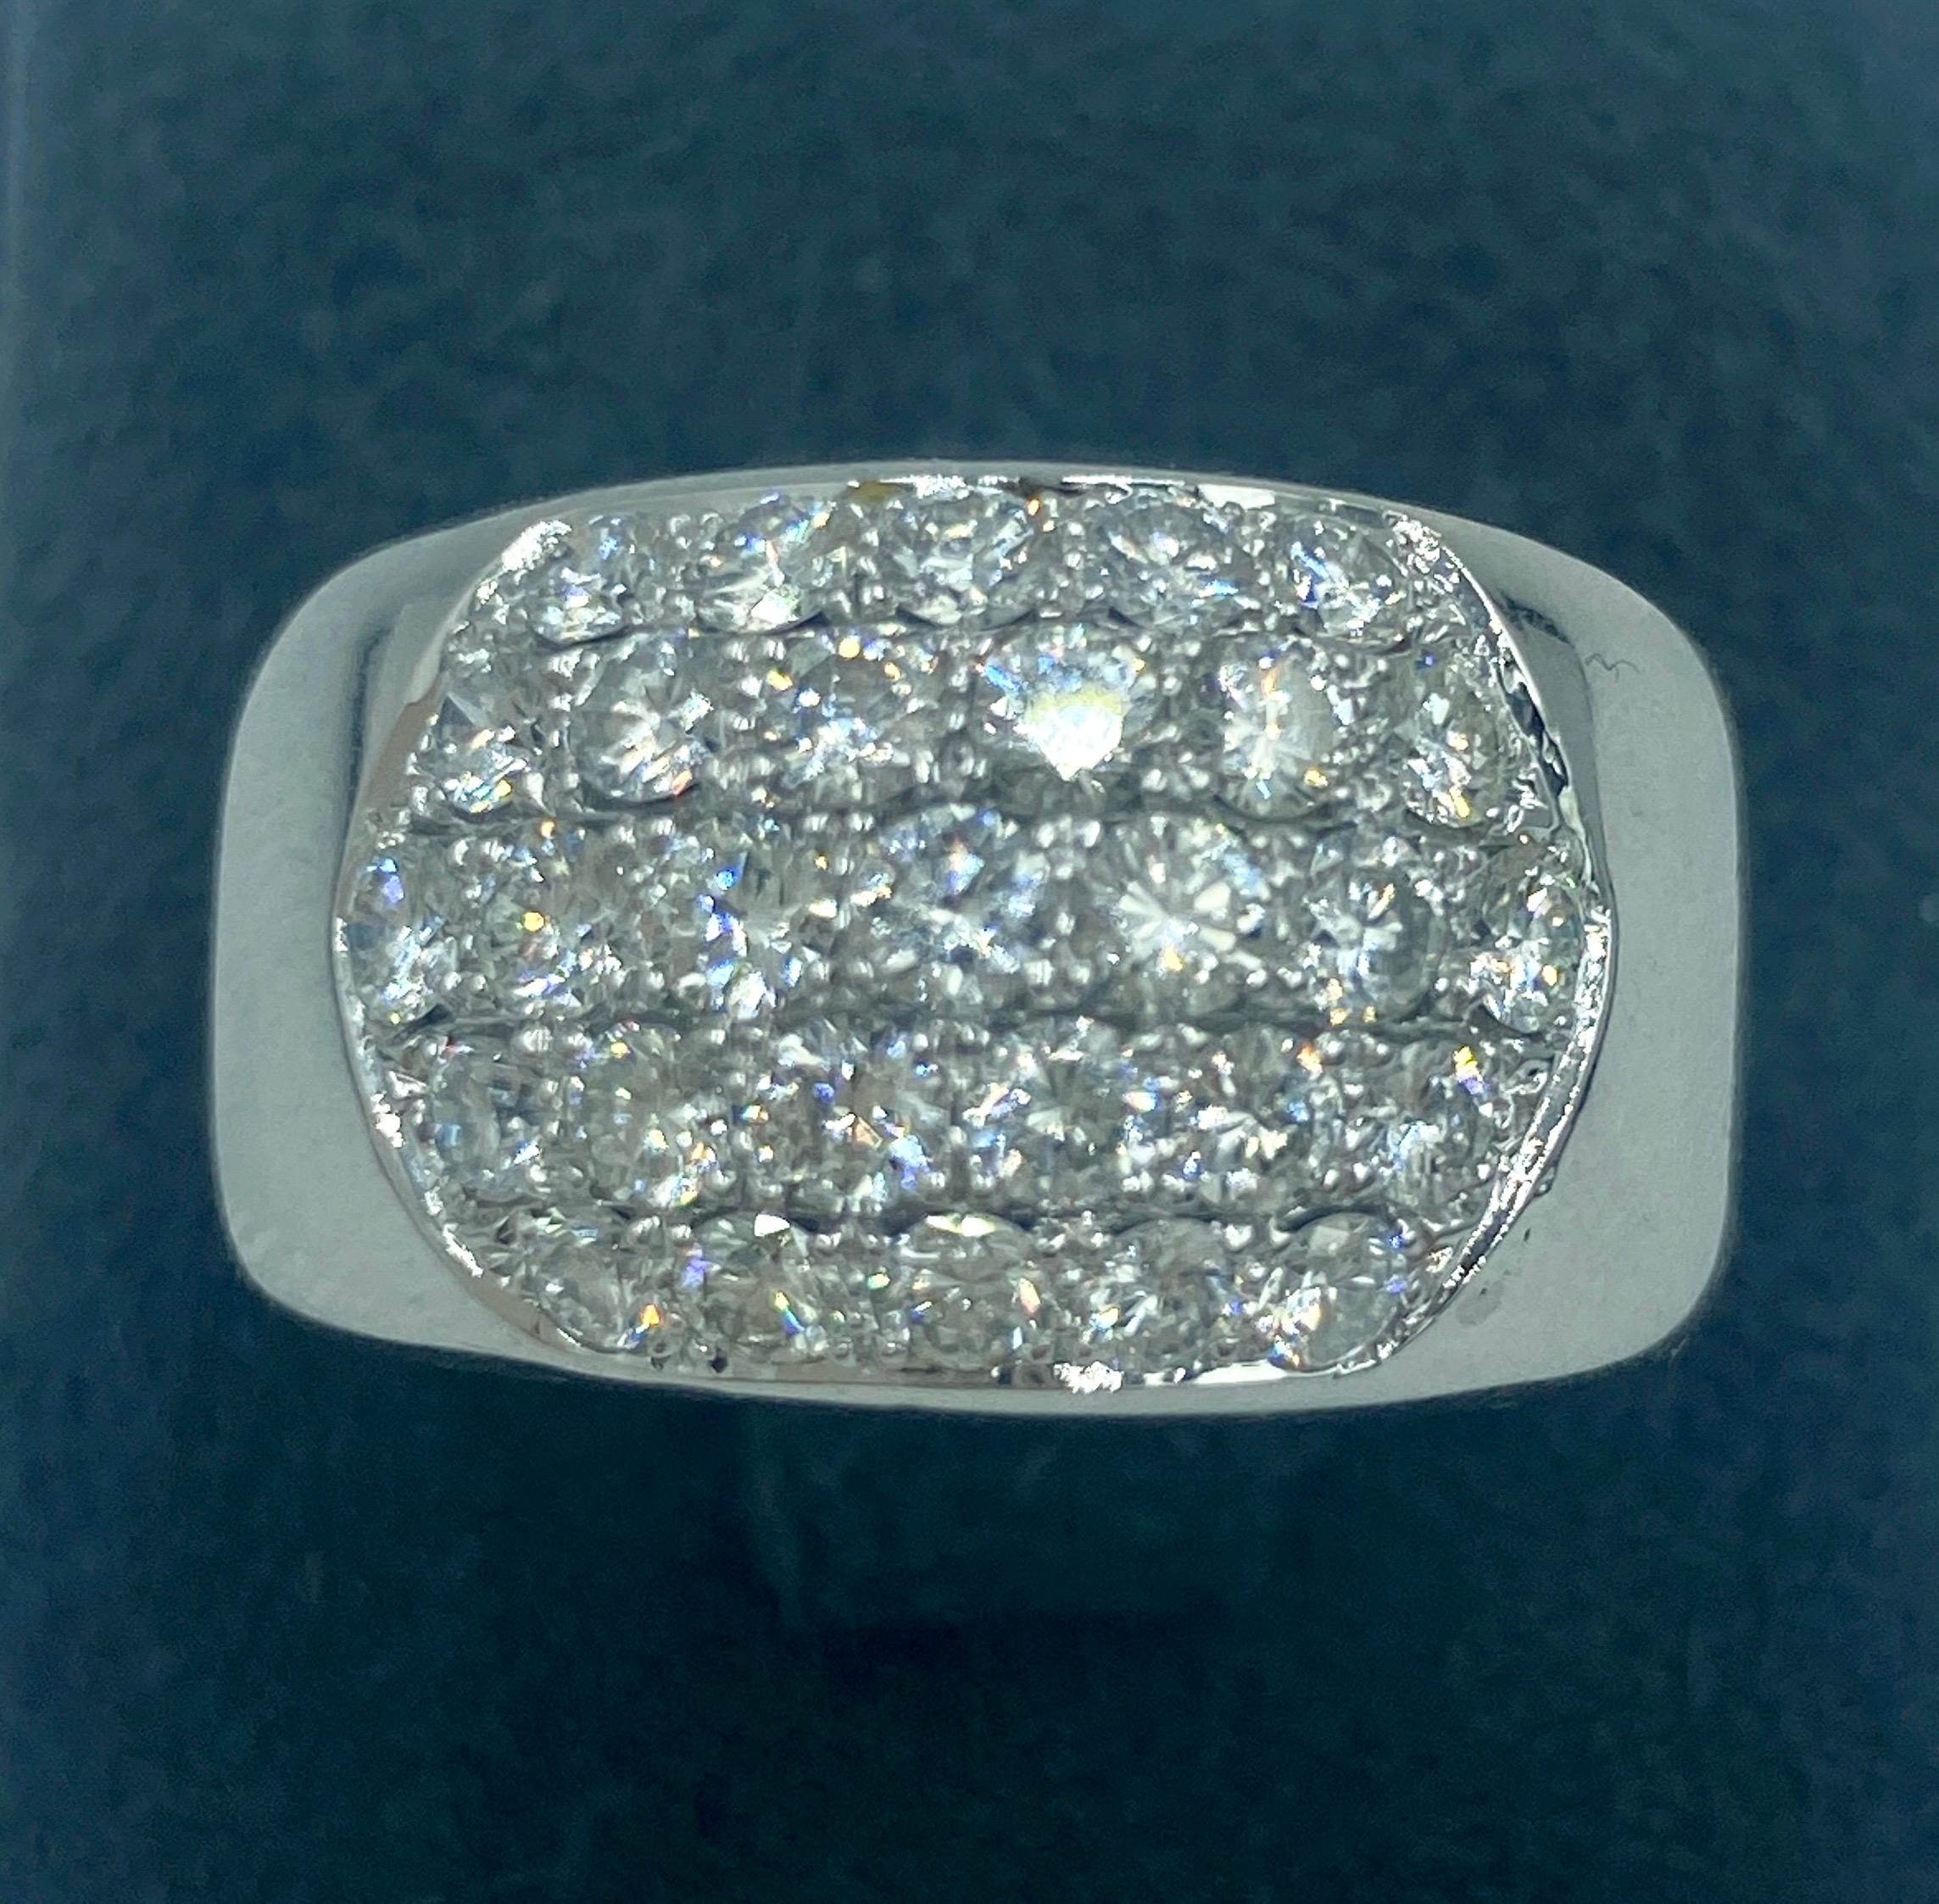 This Cartier ring marked 1997 is made of 18k white gold and has 5 rows of round cut diamonds. It is a timeless classic.